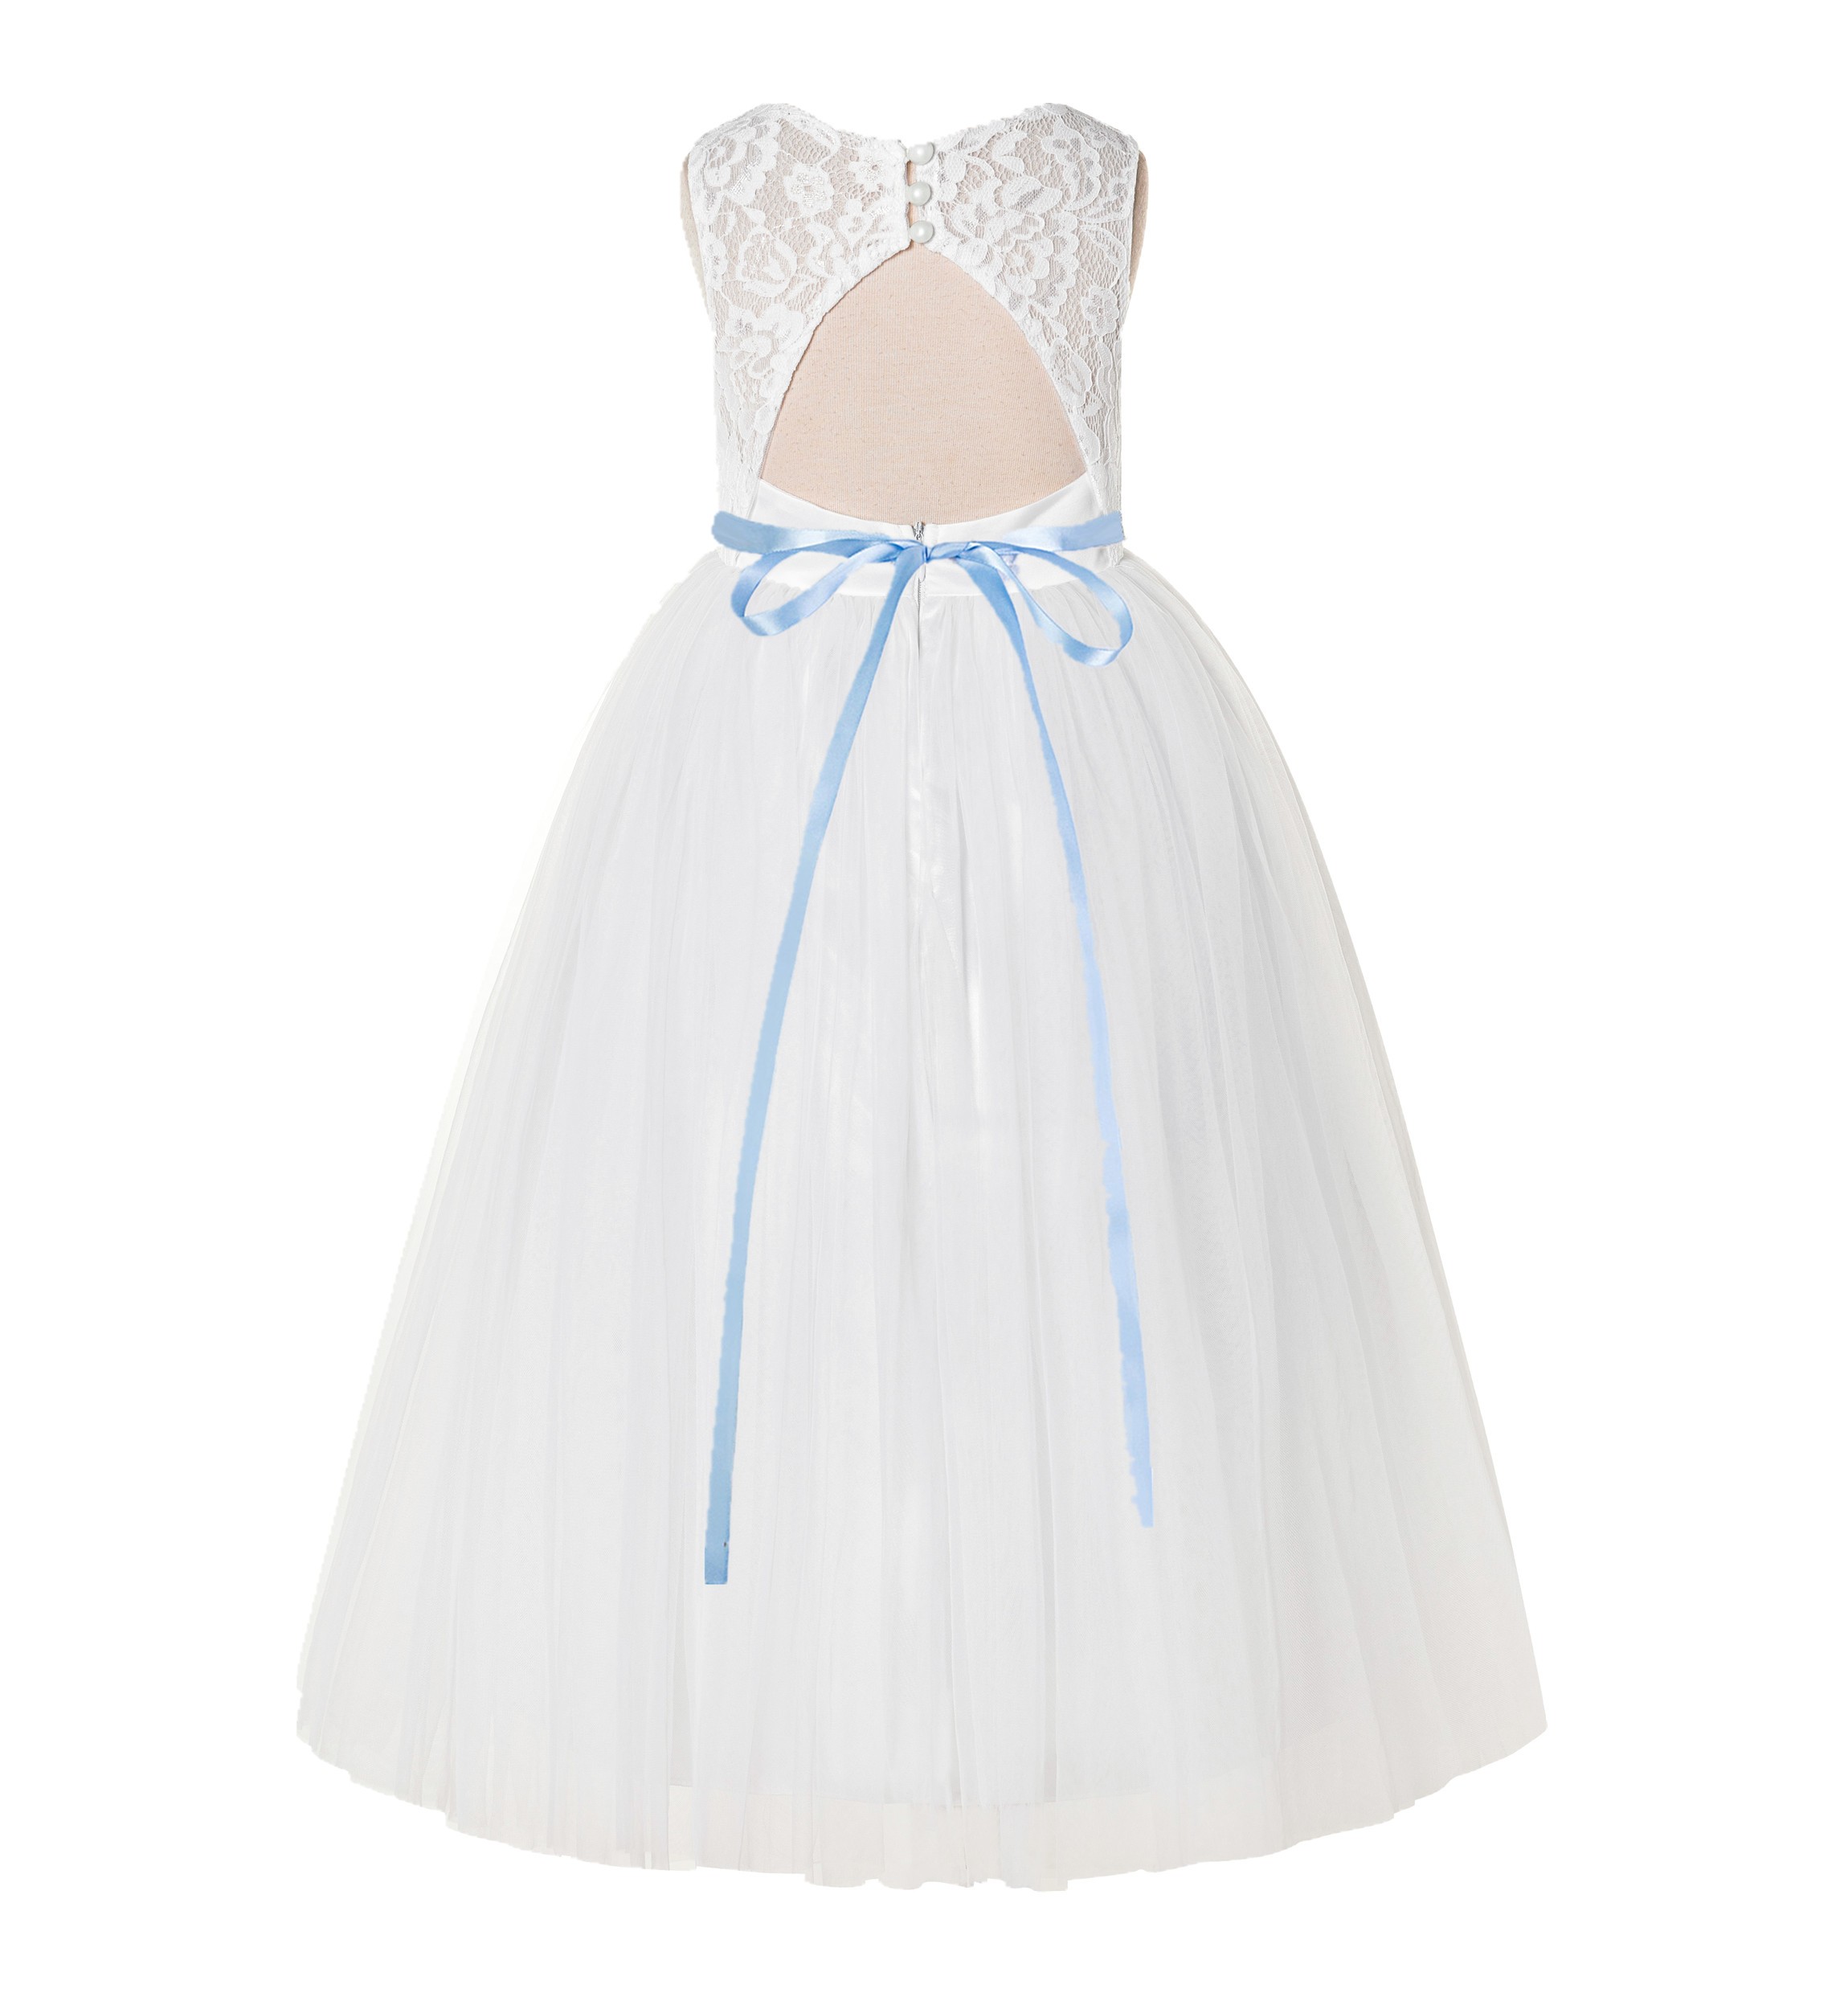 Ivory / Dusty Blue A-Line Tulle Lace Flower Girl Dress 178R7